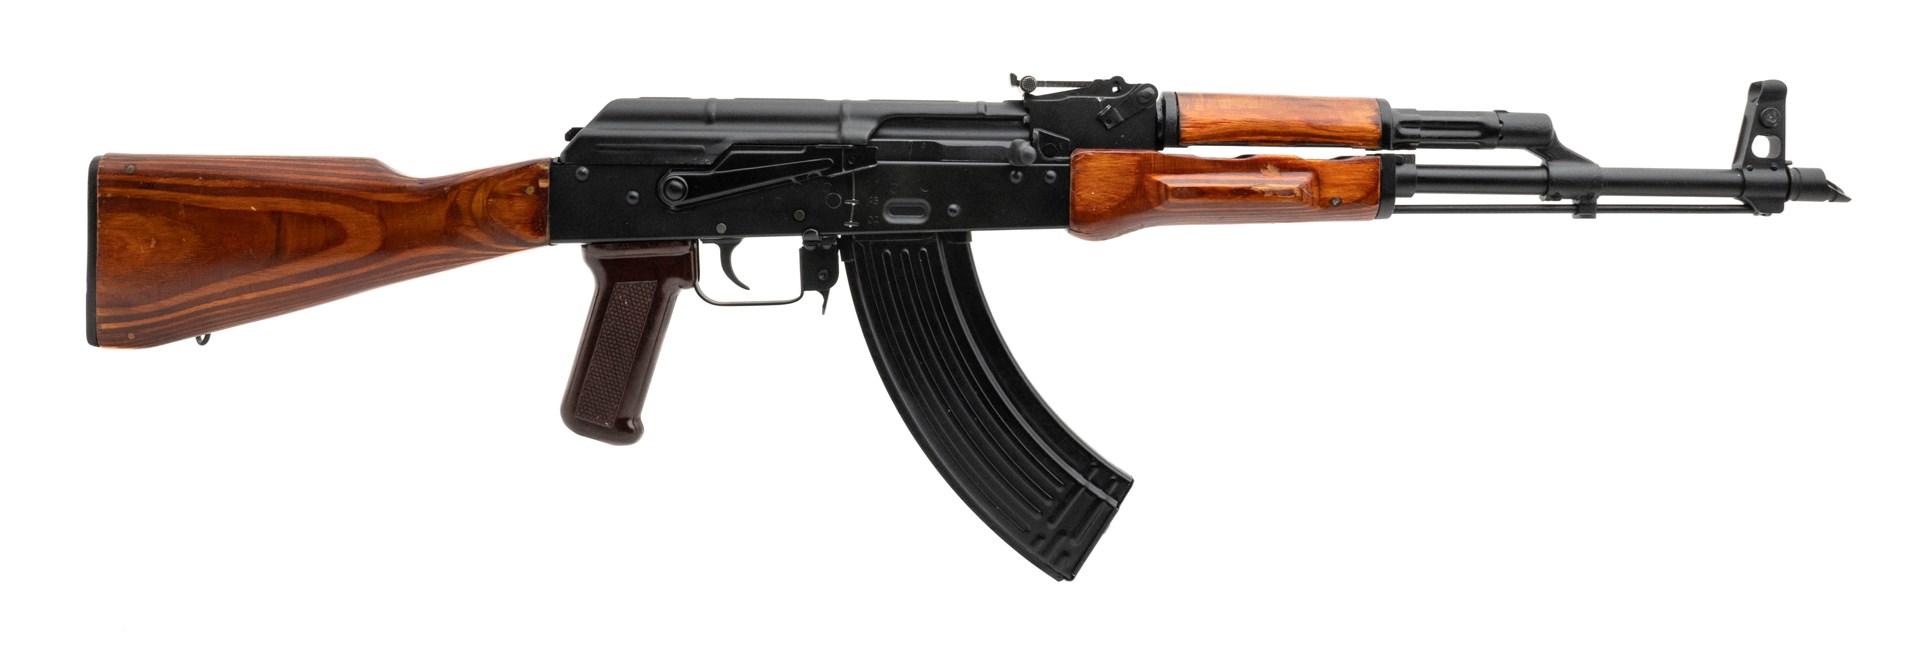 Right side view of a 1973 Tula AKM semi-automatic kit built using a Childers receiver. Photograph by Jeff Hallinan of Collectors Firearms in Houston, Texas.